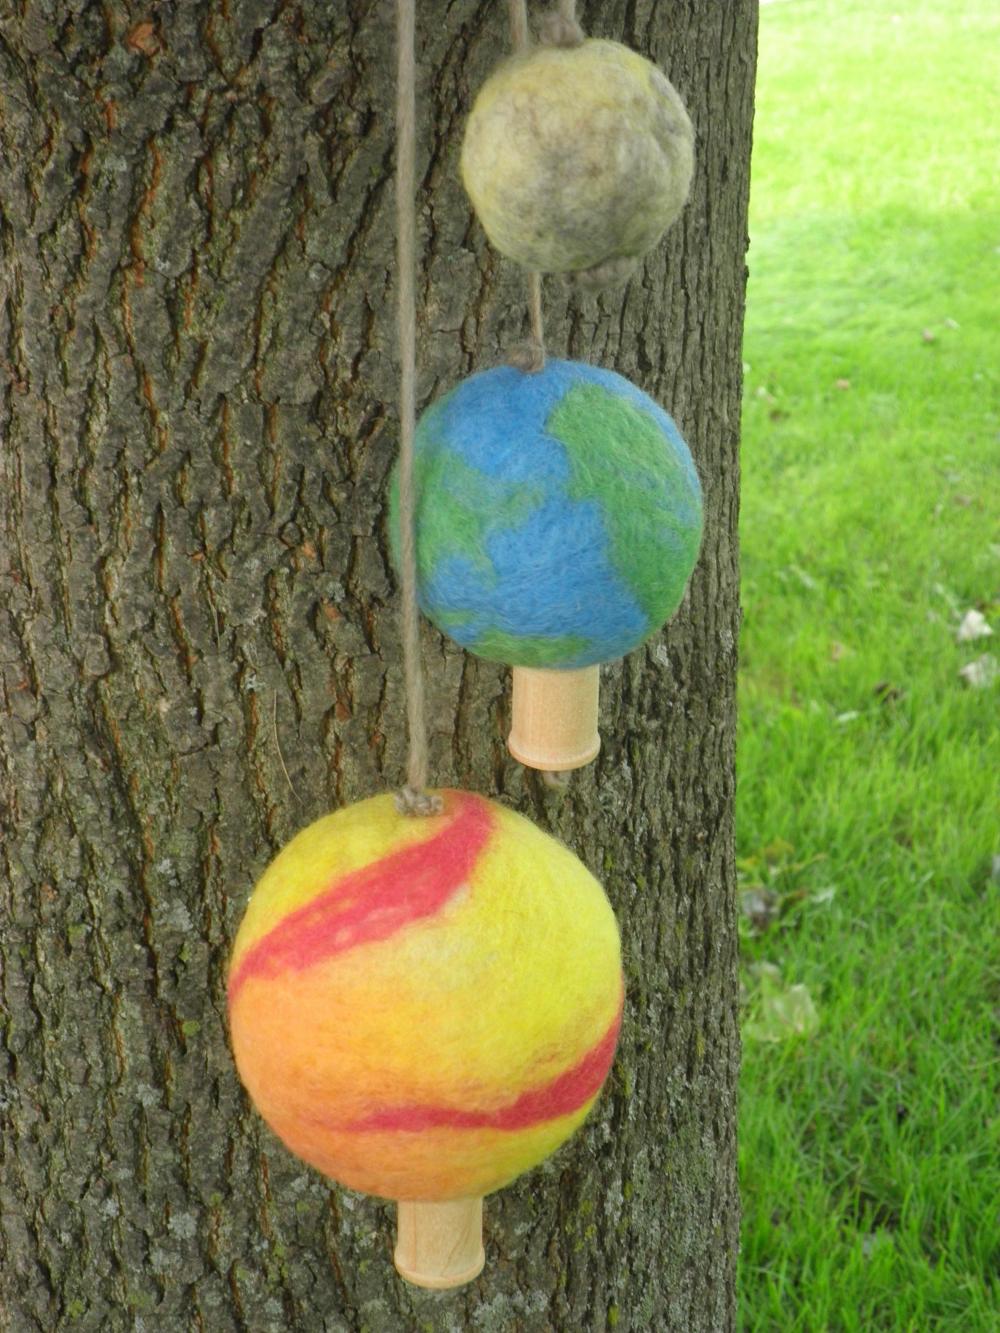 Earth Moon Sun Needle Felted Wool Ball Set. Unique For Home. Decor Mobile For, Child's Room, Baby Mobile. Eco Friendly.